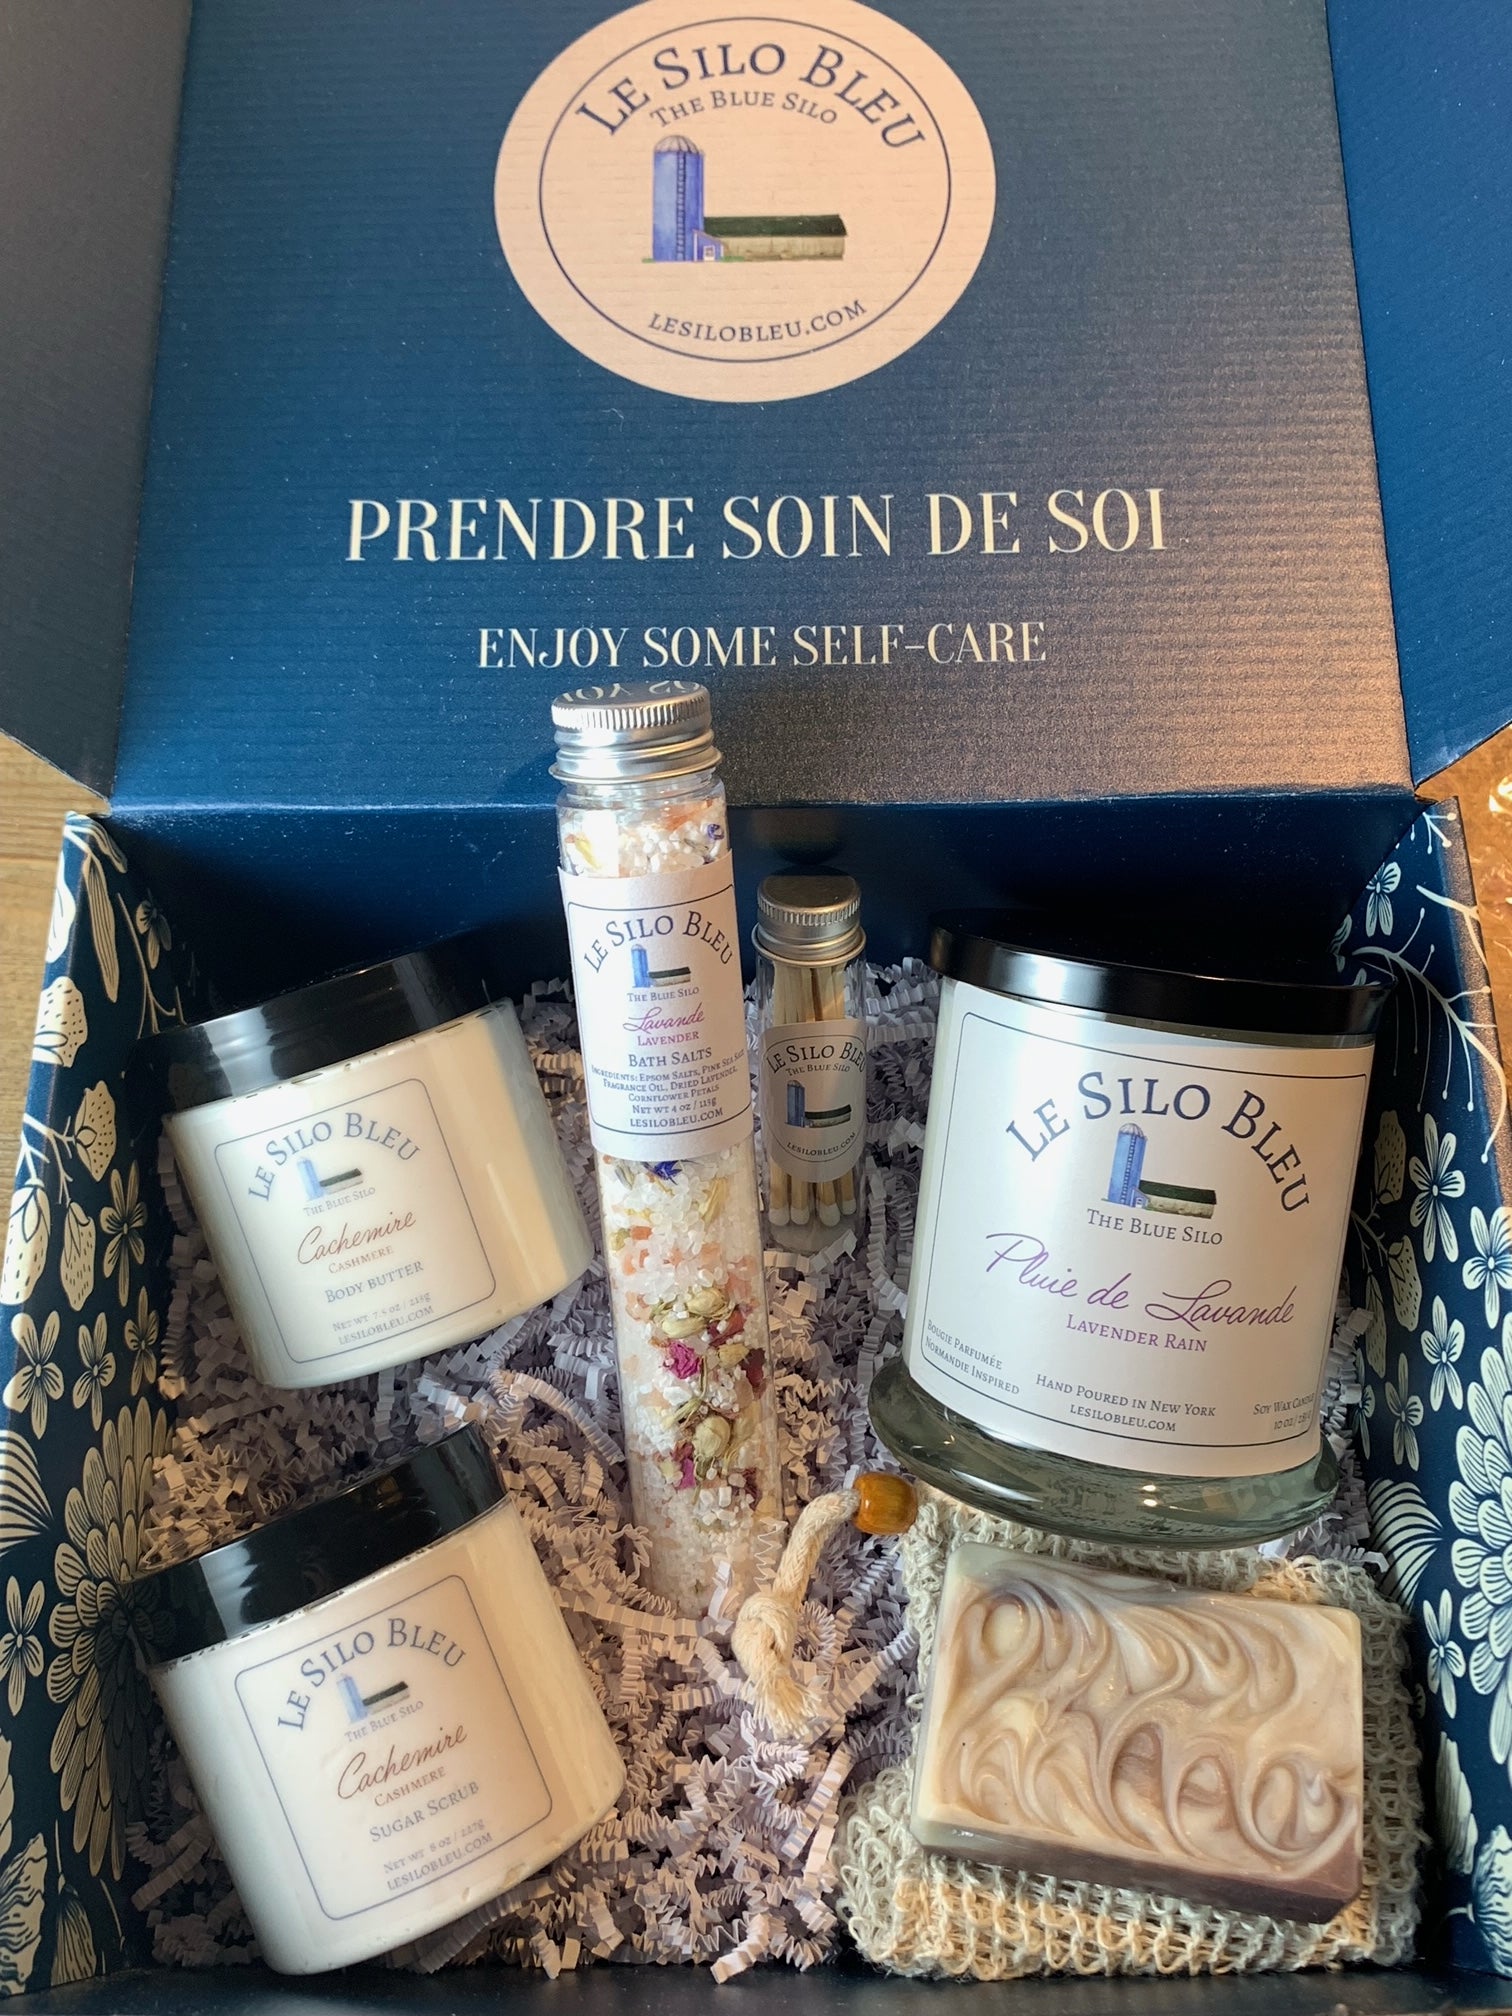 Le Silo Bleu Gift box with soap, body butter, sugar scrub, a large 10oz candle, matches in a tube and a tube of bath salts all packaged in a premium branded box with blue and white flowers printed on it. 